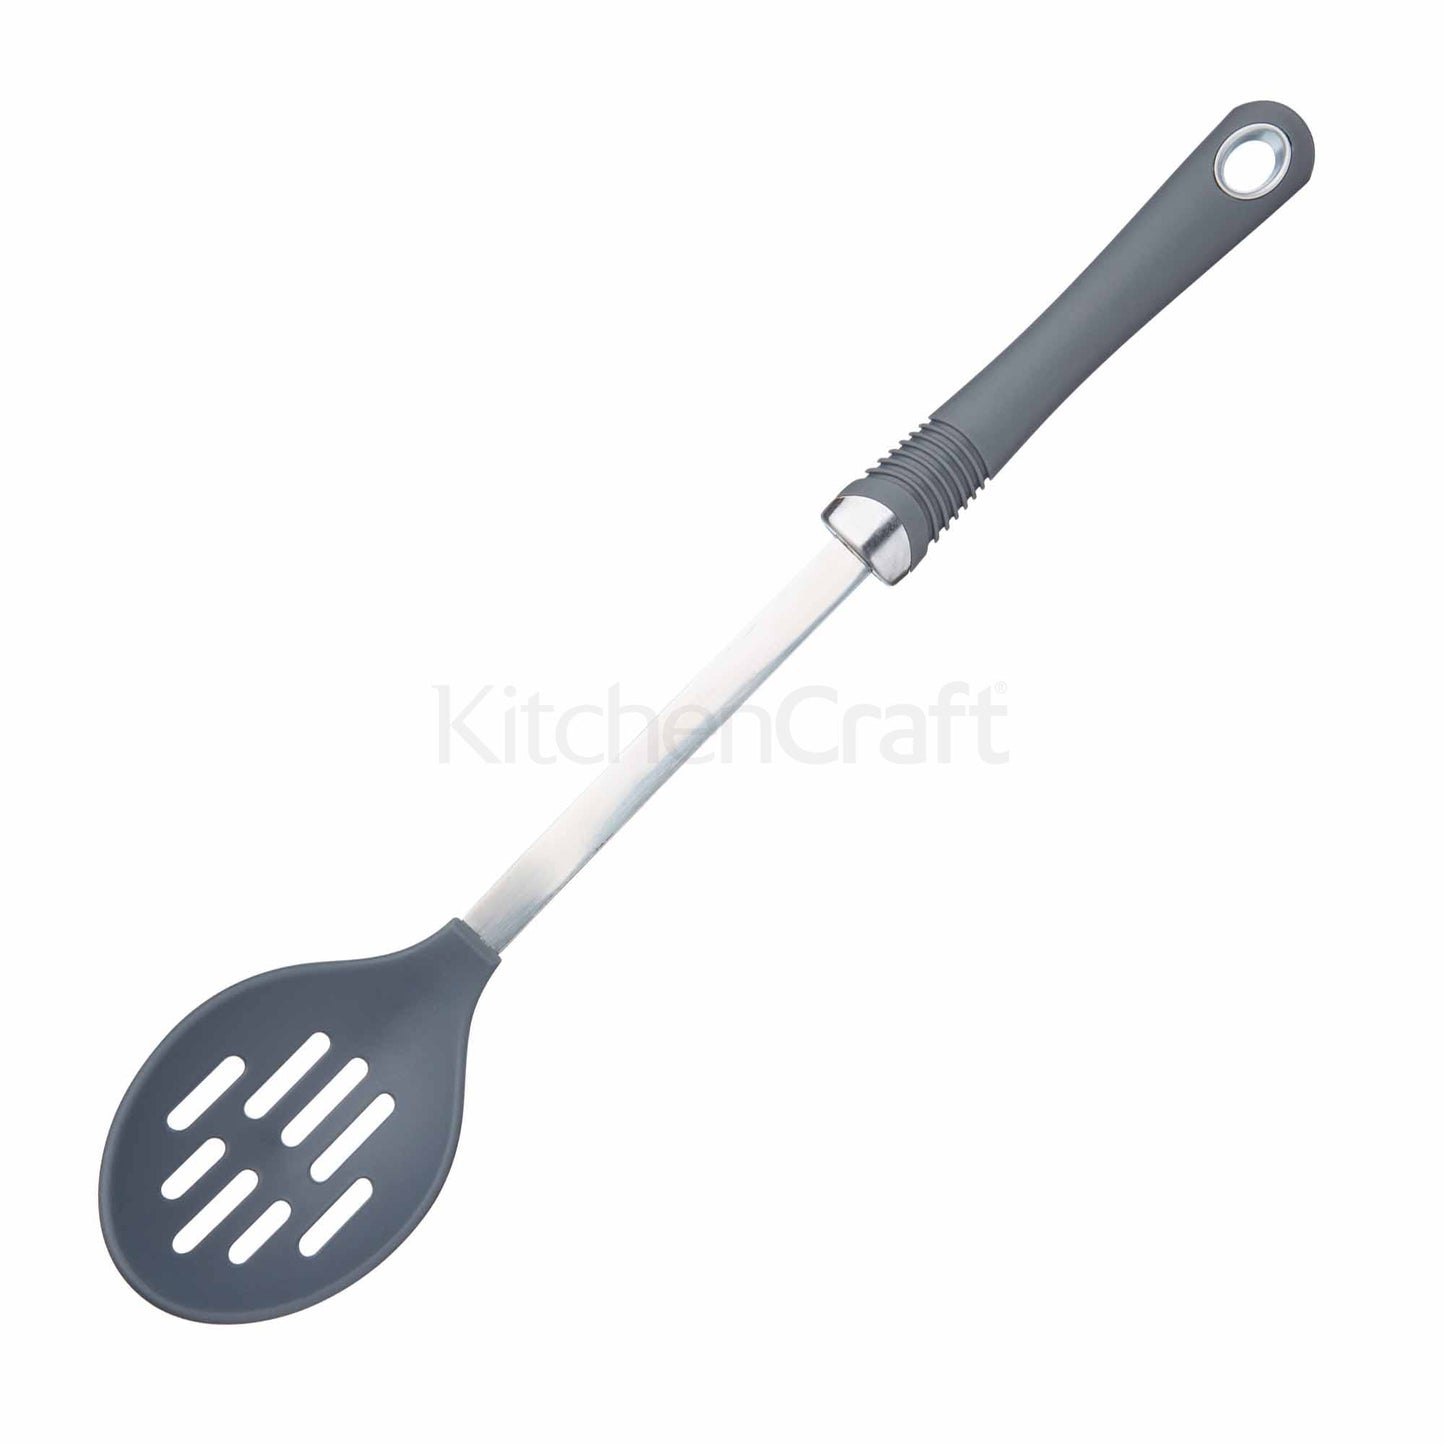 KitchenCraft Pro Tools Soft Grip Slotted Spoon